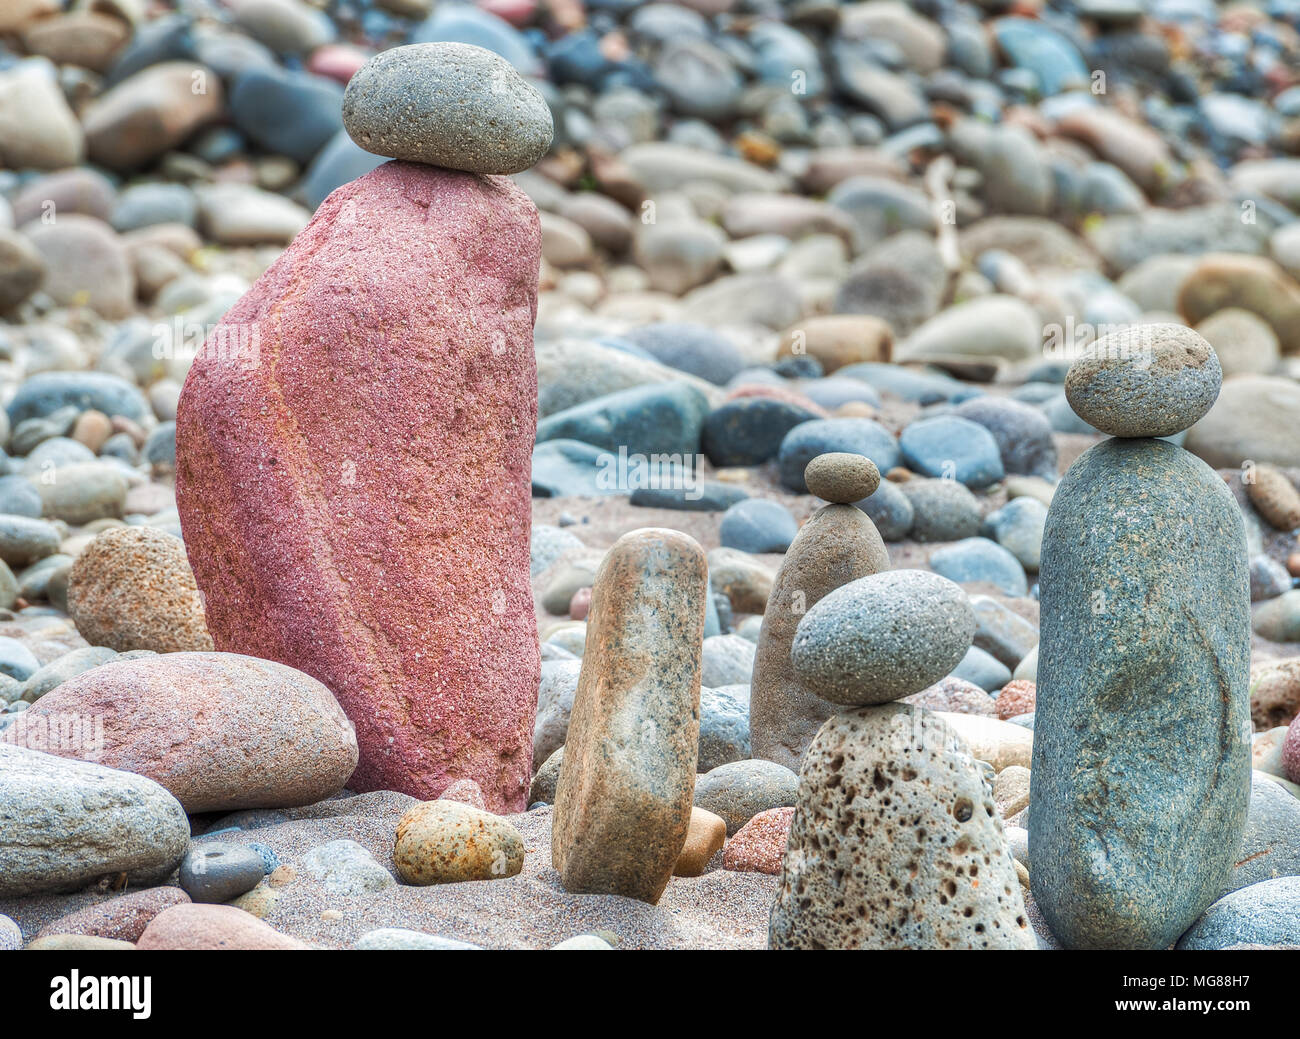 Stacks of river rocks resembling people along a sandy beach of the Sandy River in Oregon.  Many are grouped into little families, solidarity figures t Stock Photo